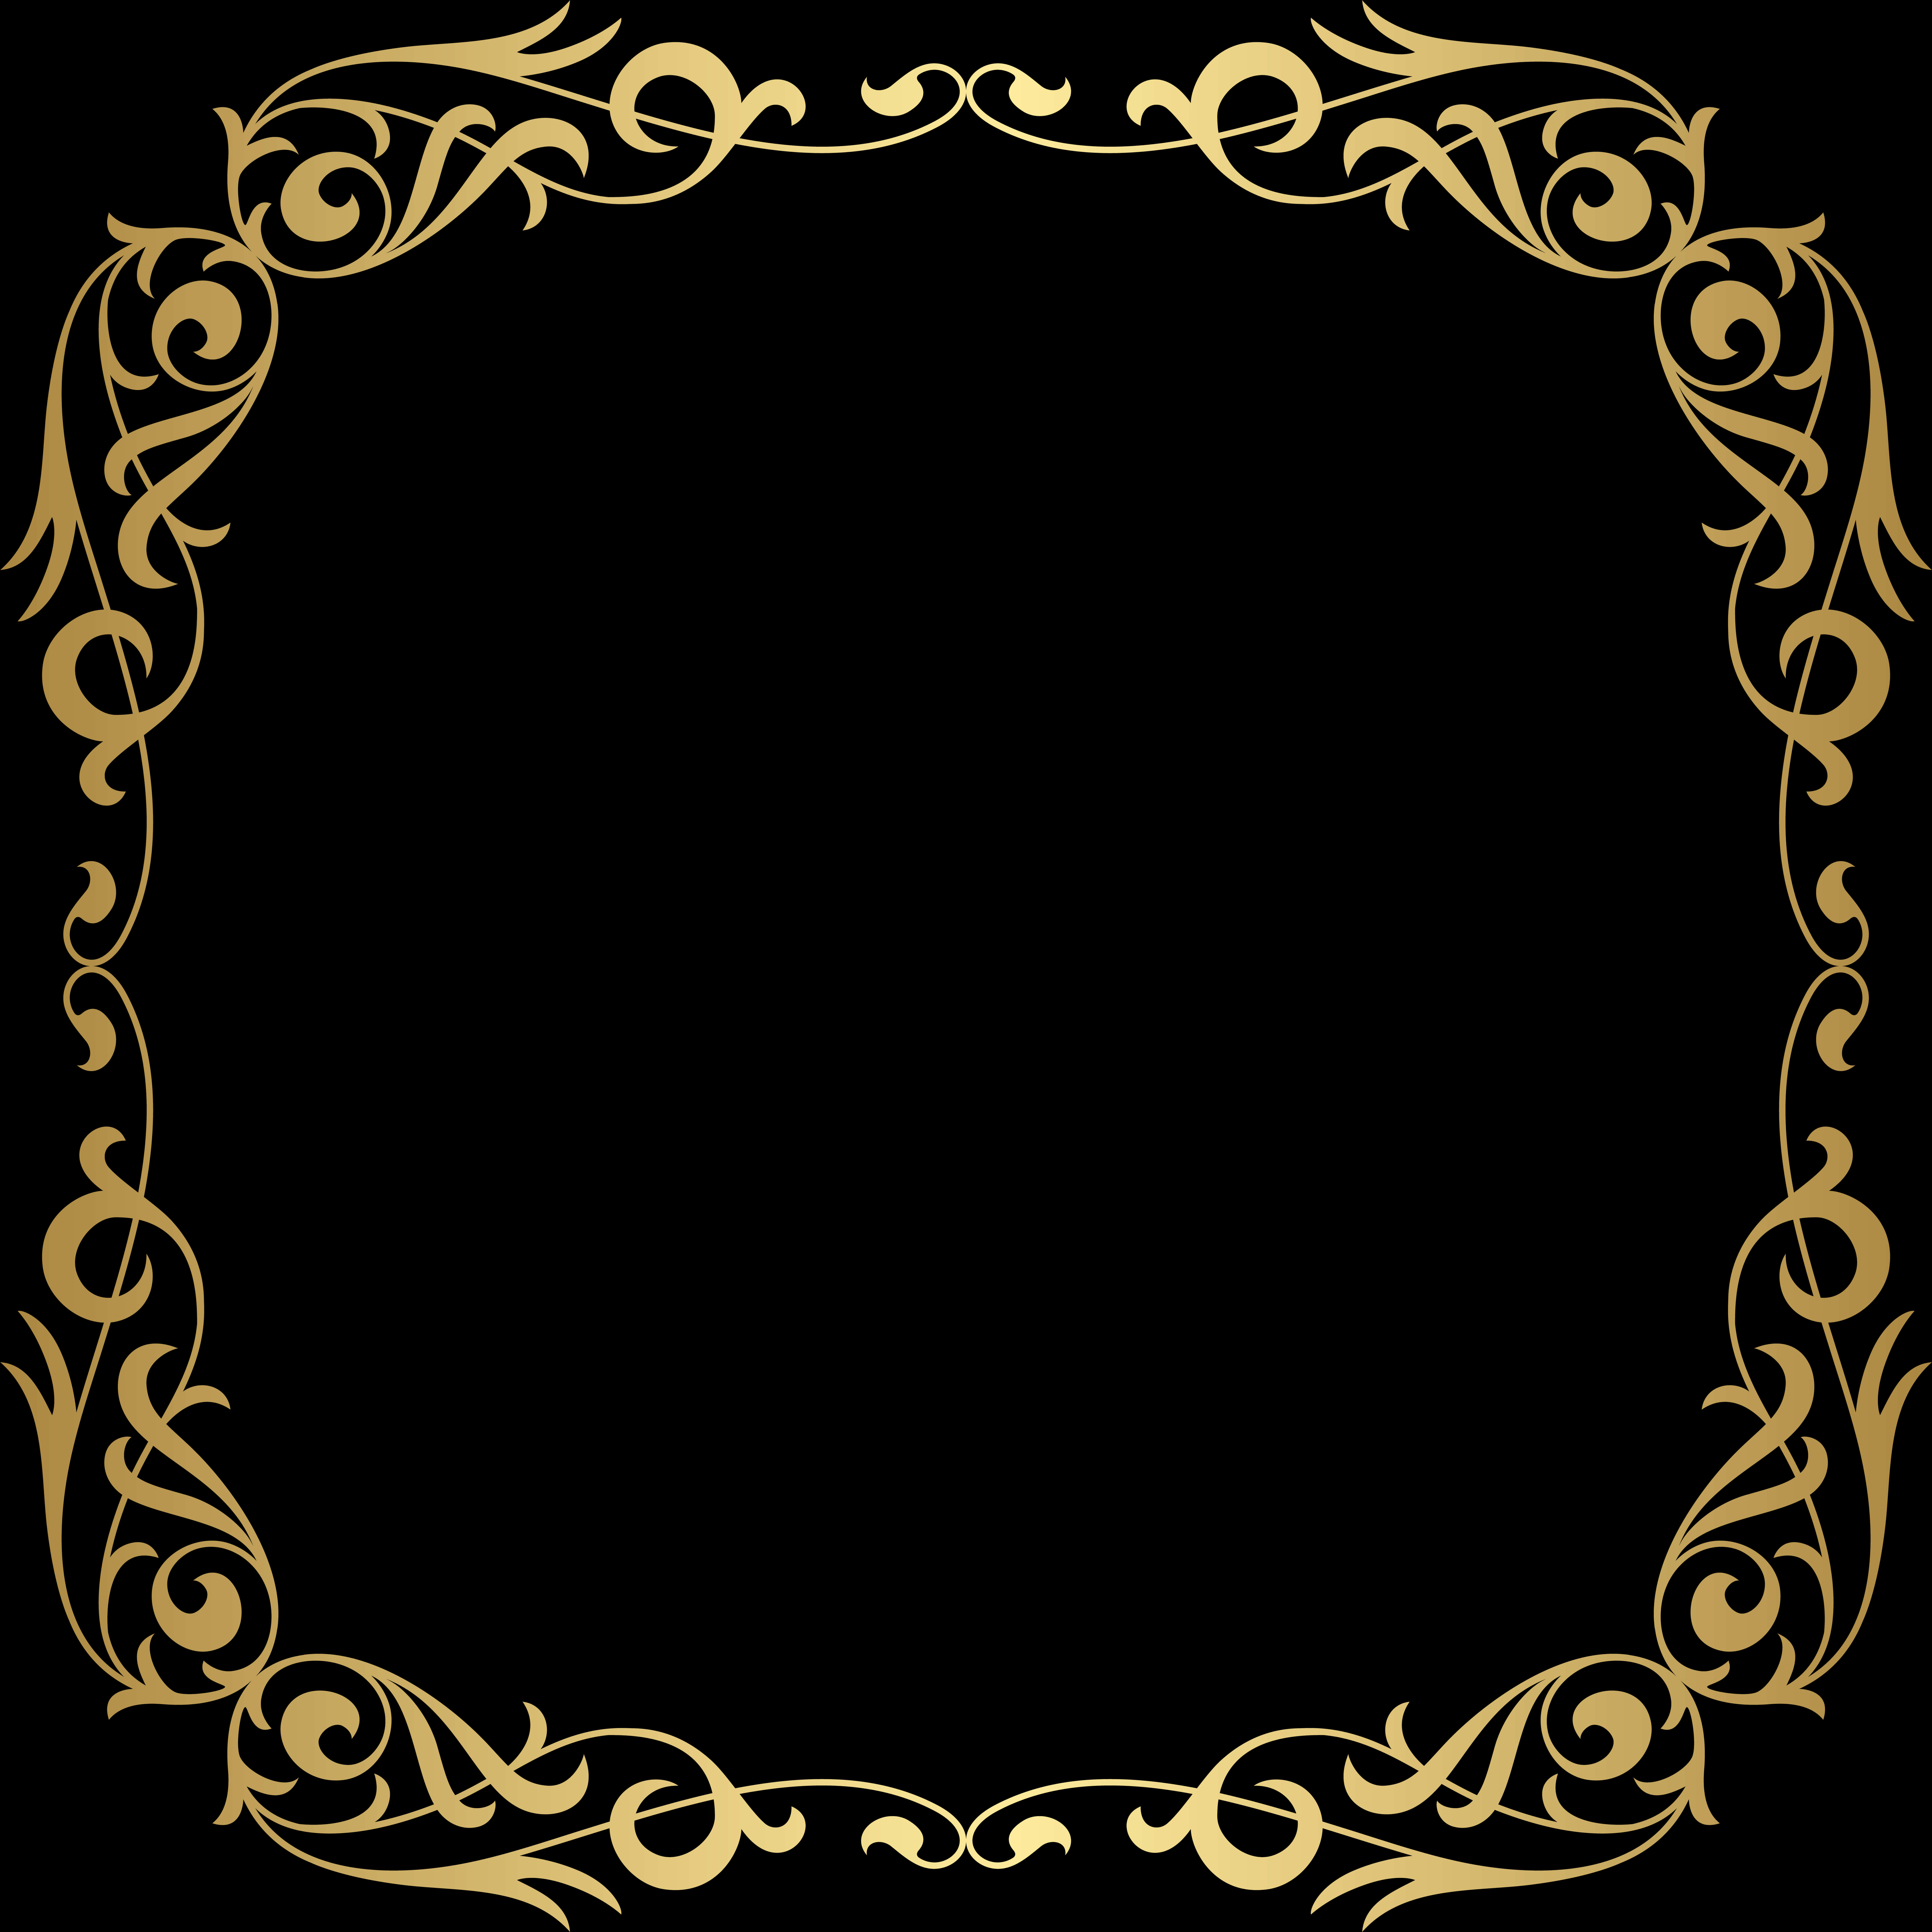 A Gold Frame With Swirls On A Black Background